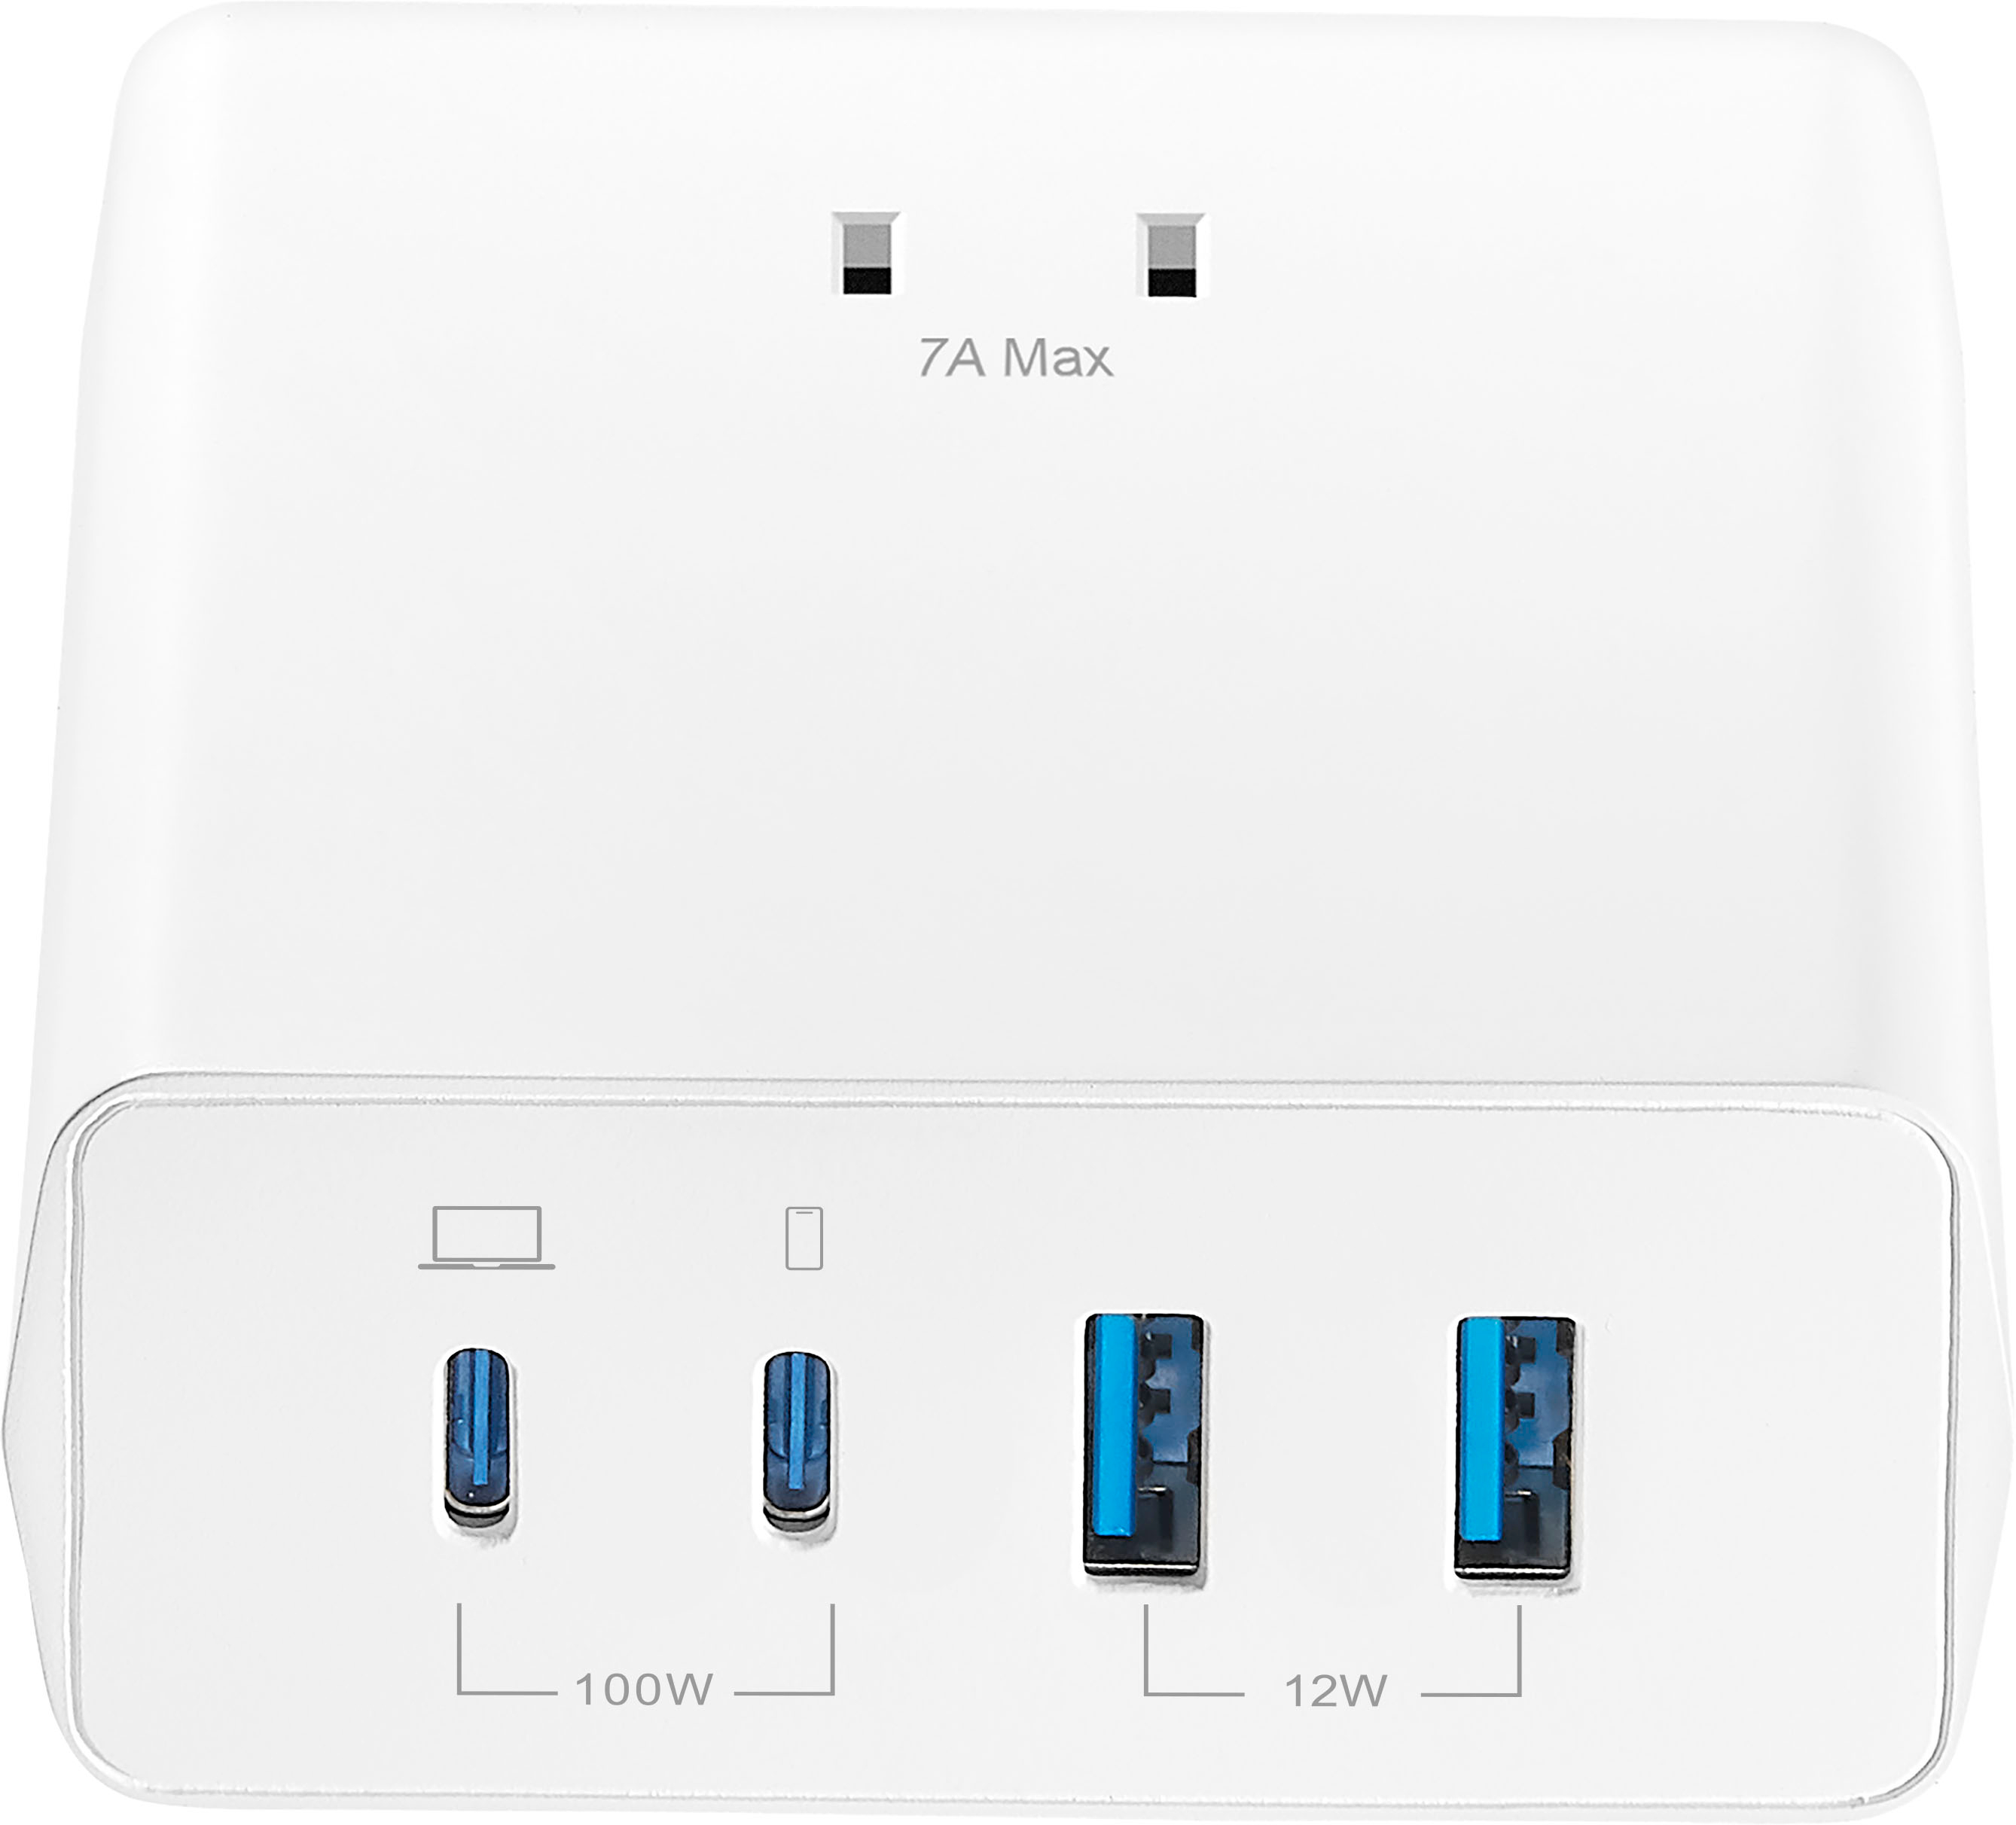 Insignia™ 65W Dual Port USB-C Compact Wall Charger for MacBook Pro, MacBook  Air, and most USB-C Laptops White NS-PW365C2W22 - Best Buy